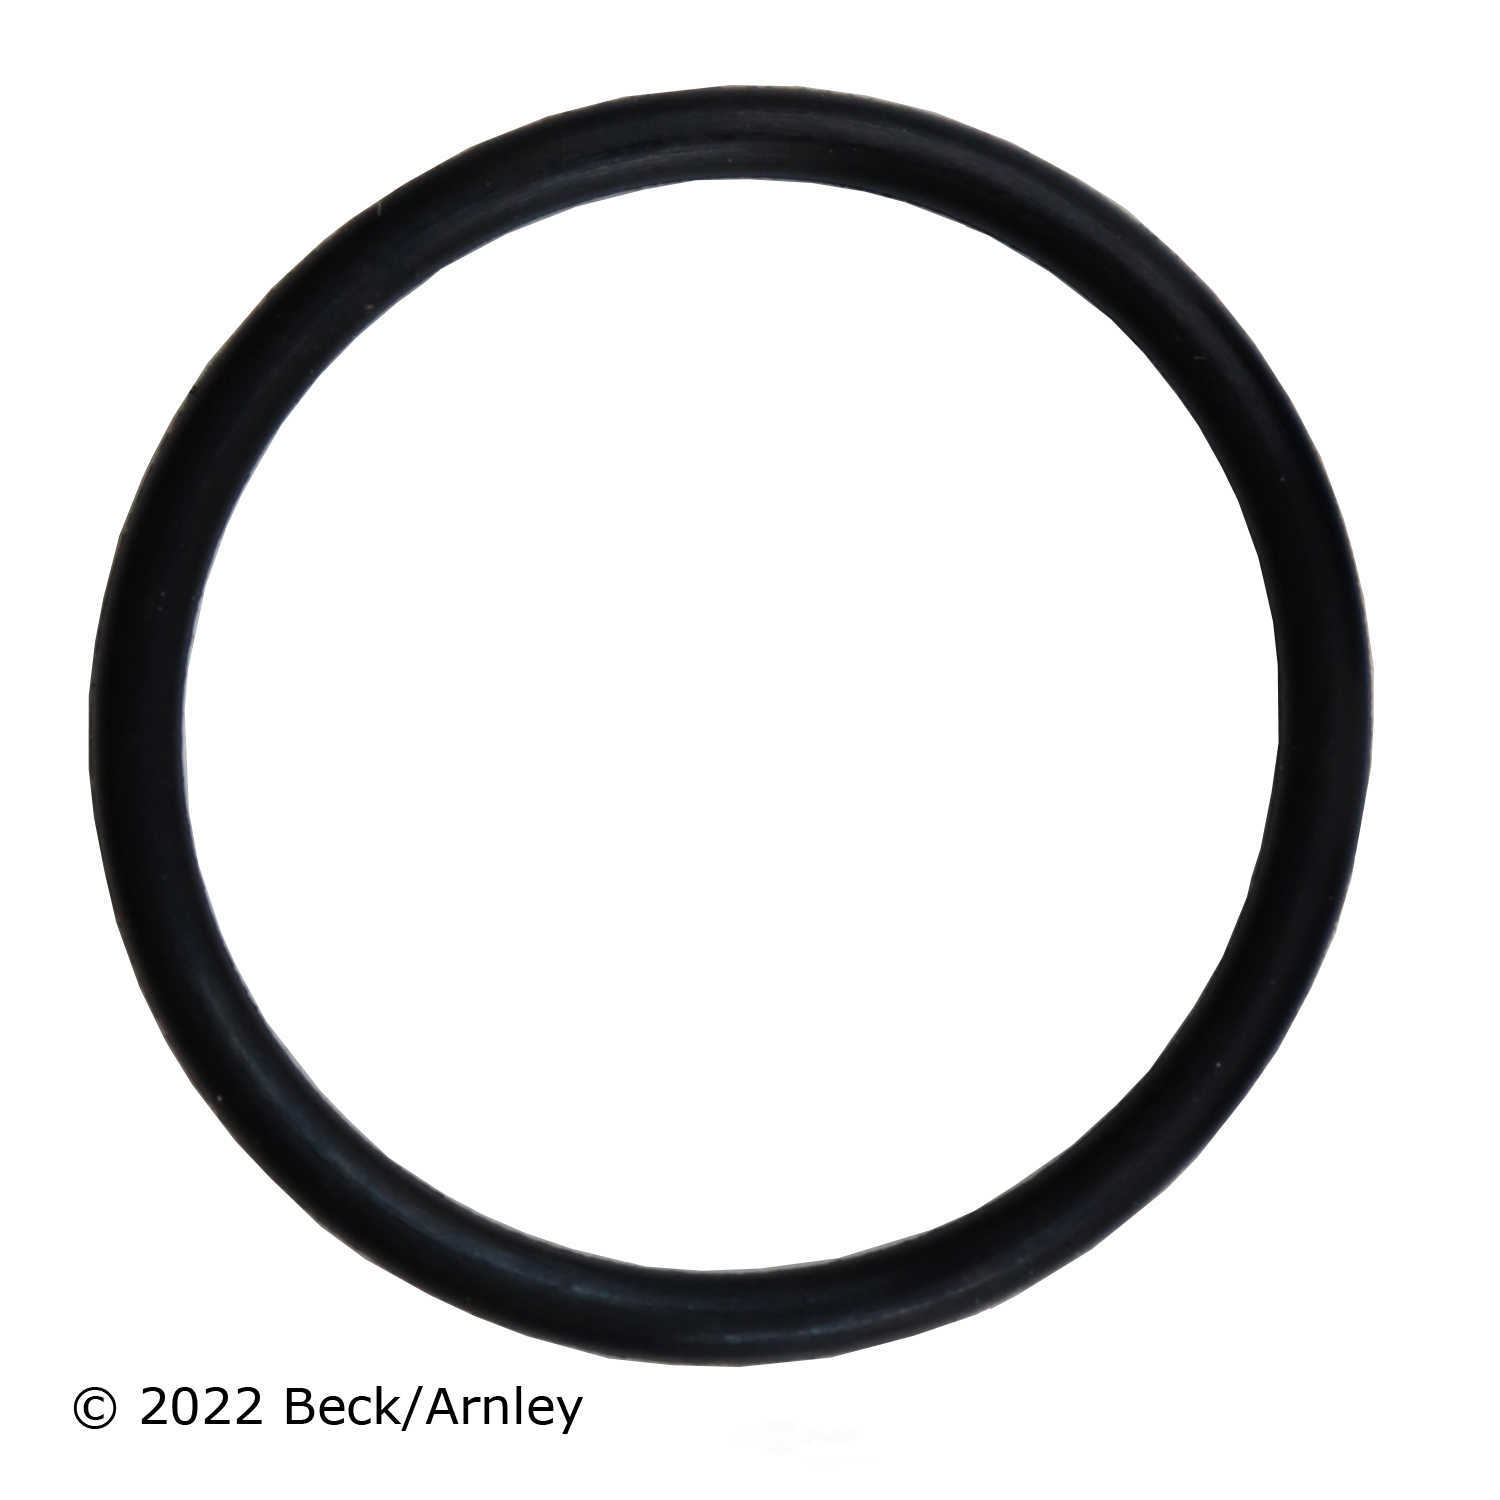 BECK/ARNLEY - Fuel Injection Nozzle O-Ring Kit - BAR 158-0894